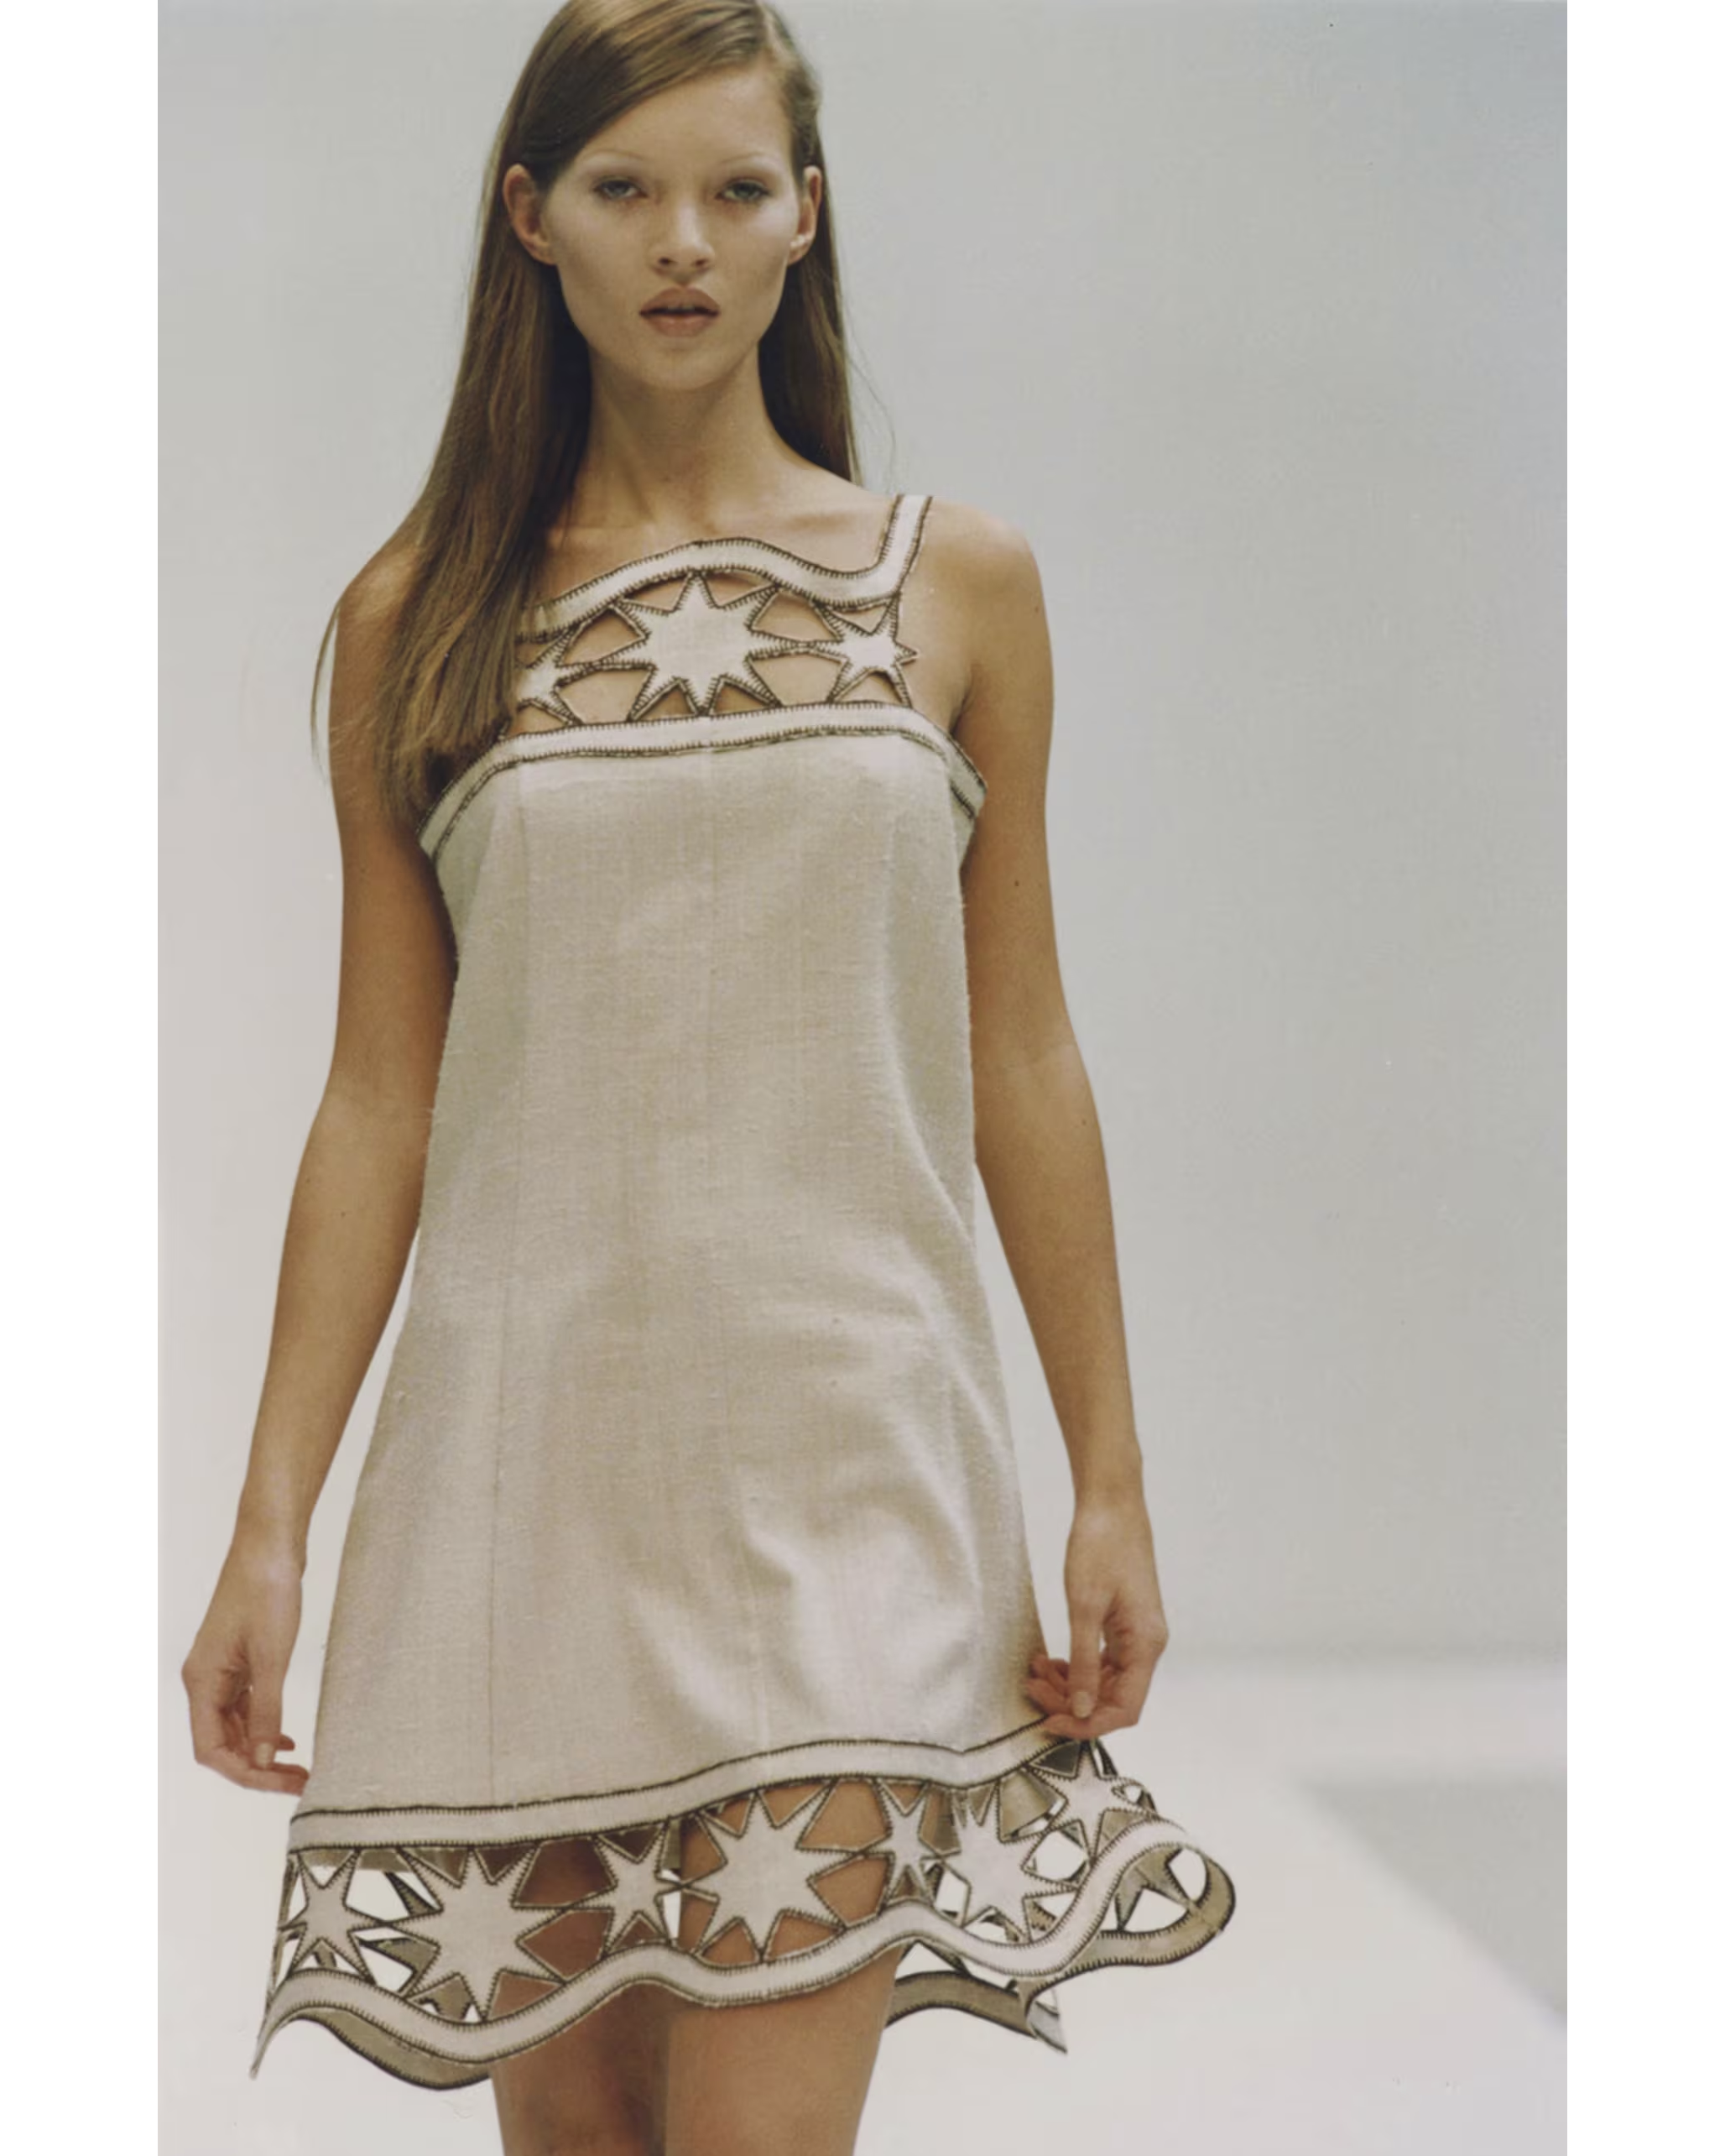 S/S 1993 Toffee-Colored Star Cutout Dress